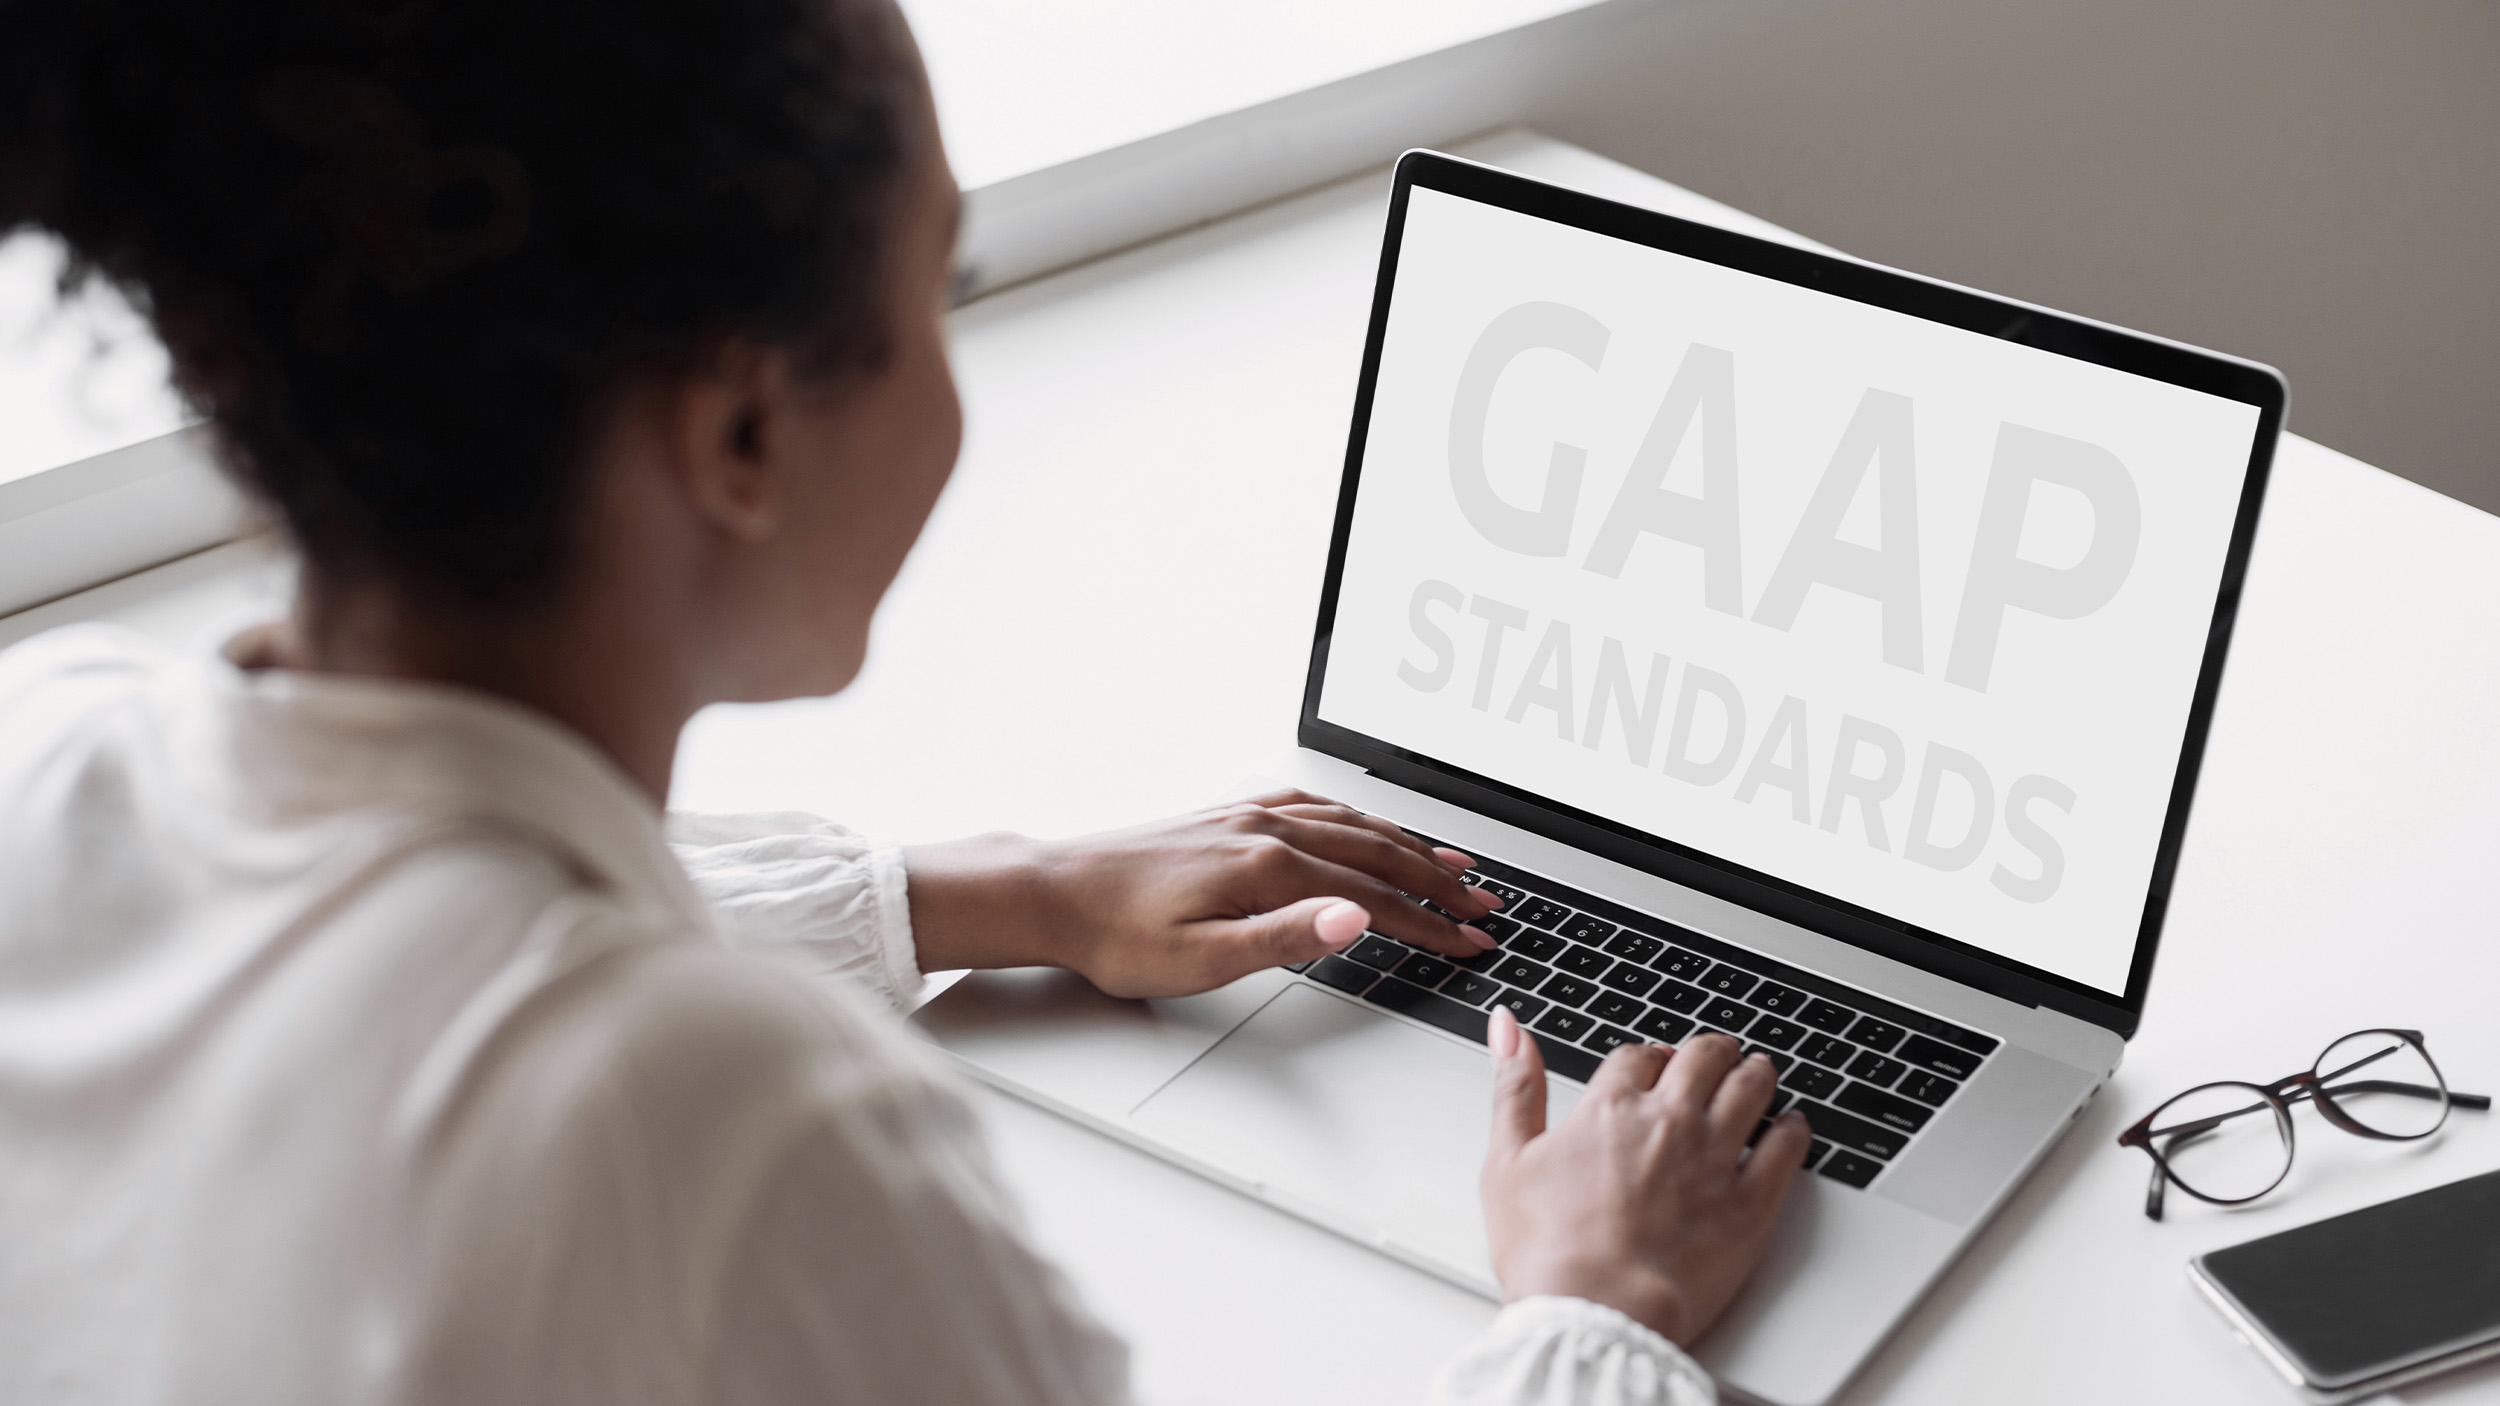 A Black female accountant looks at a laptop screen that has the words 'GAAP standards' against a white screen.